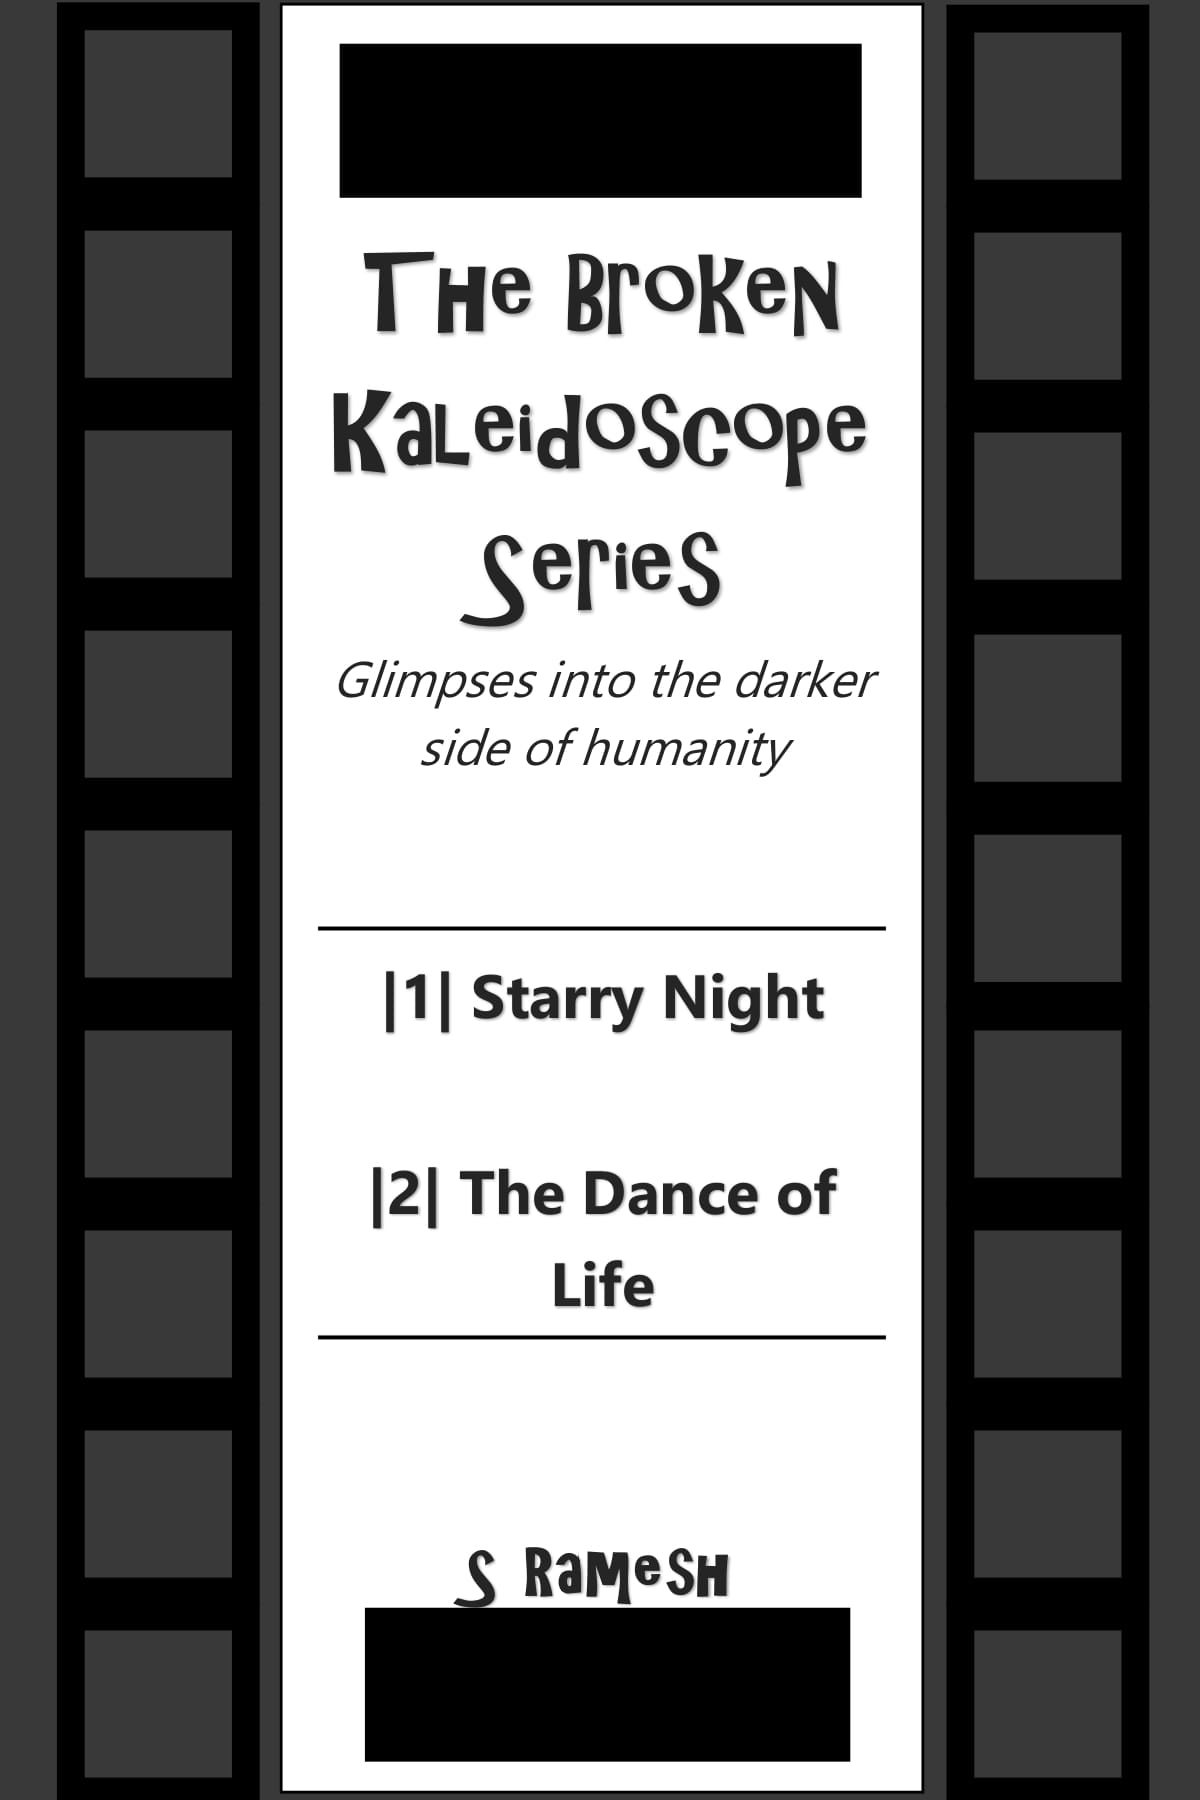 FREE: The Broken Kaleidoscope Series with Starry Night and The Dance of Life: Glimpses into the darker side of humanity (Book 1) by S Ramesh